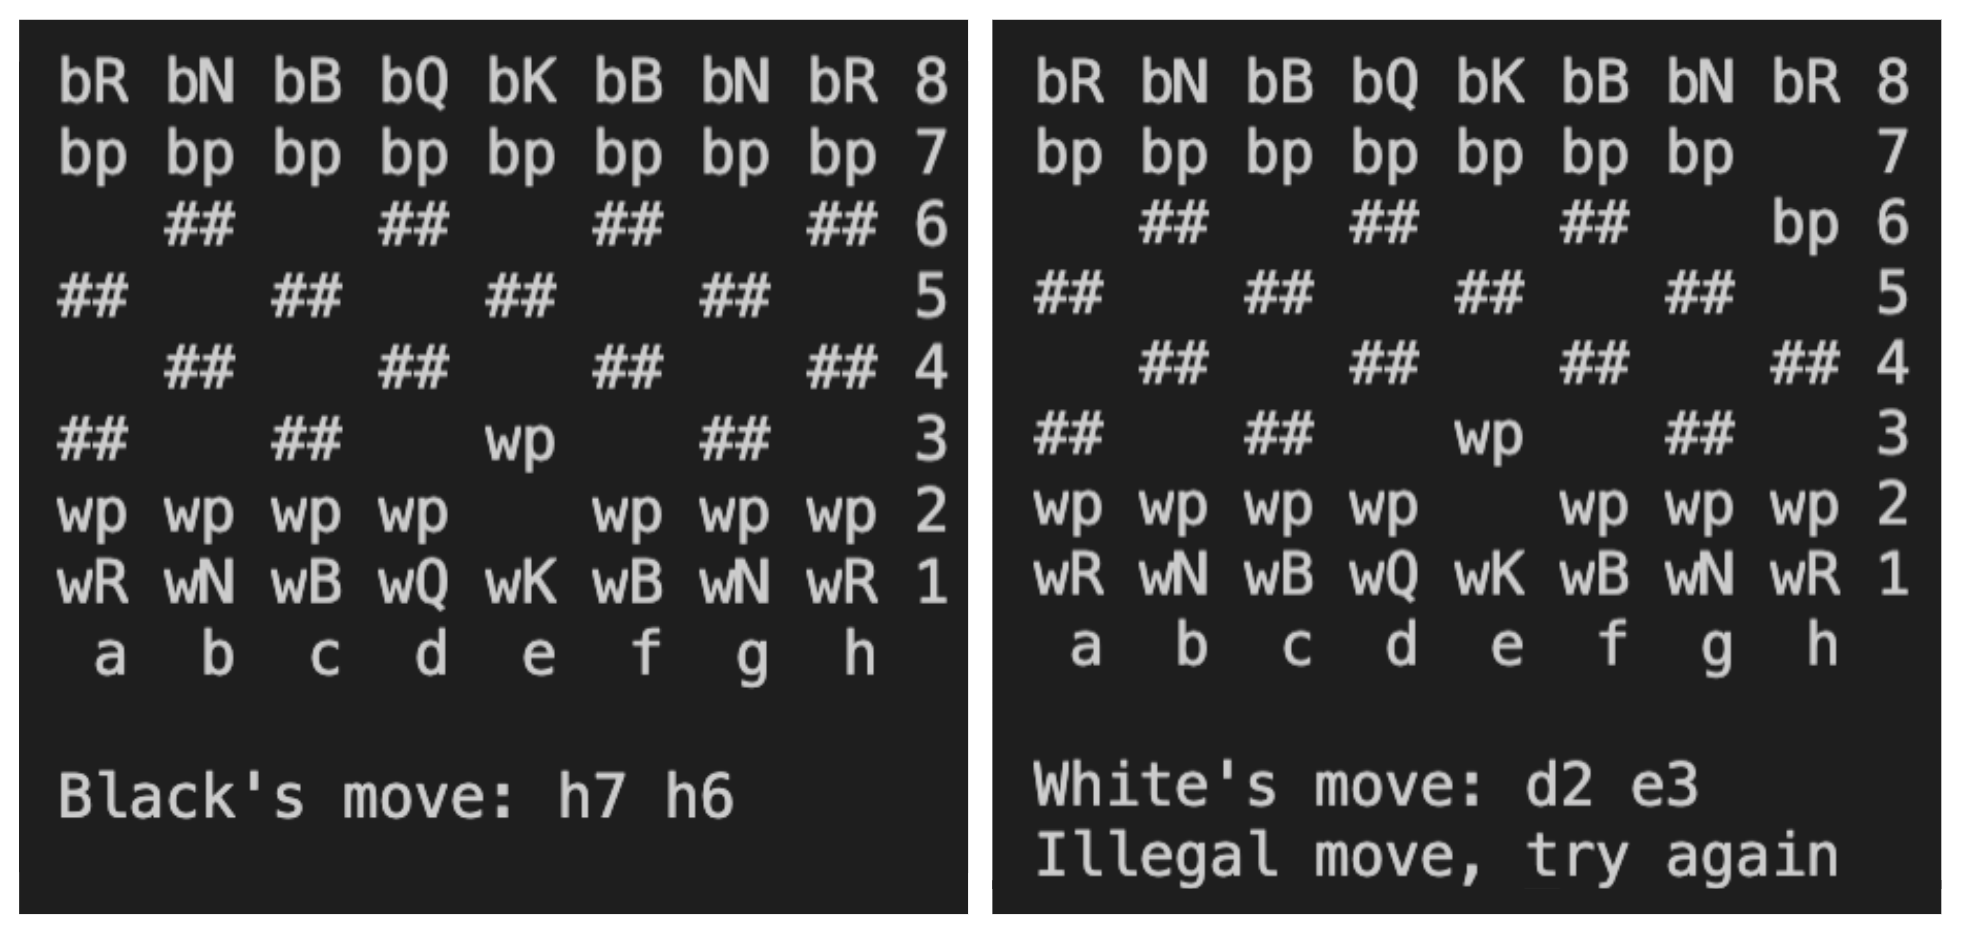 A printed command-line representation of a chess game. A checkered, 2D grid represents the board and pieces (for example, wp represents a white pawn, bR represents a black rook, etc.). The picture depicts black moving a pawn from location h7 to h6. White then attempts to move a pawn from d2 to e3, but the program informs the user that the move is illegal.